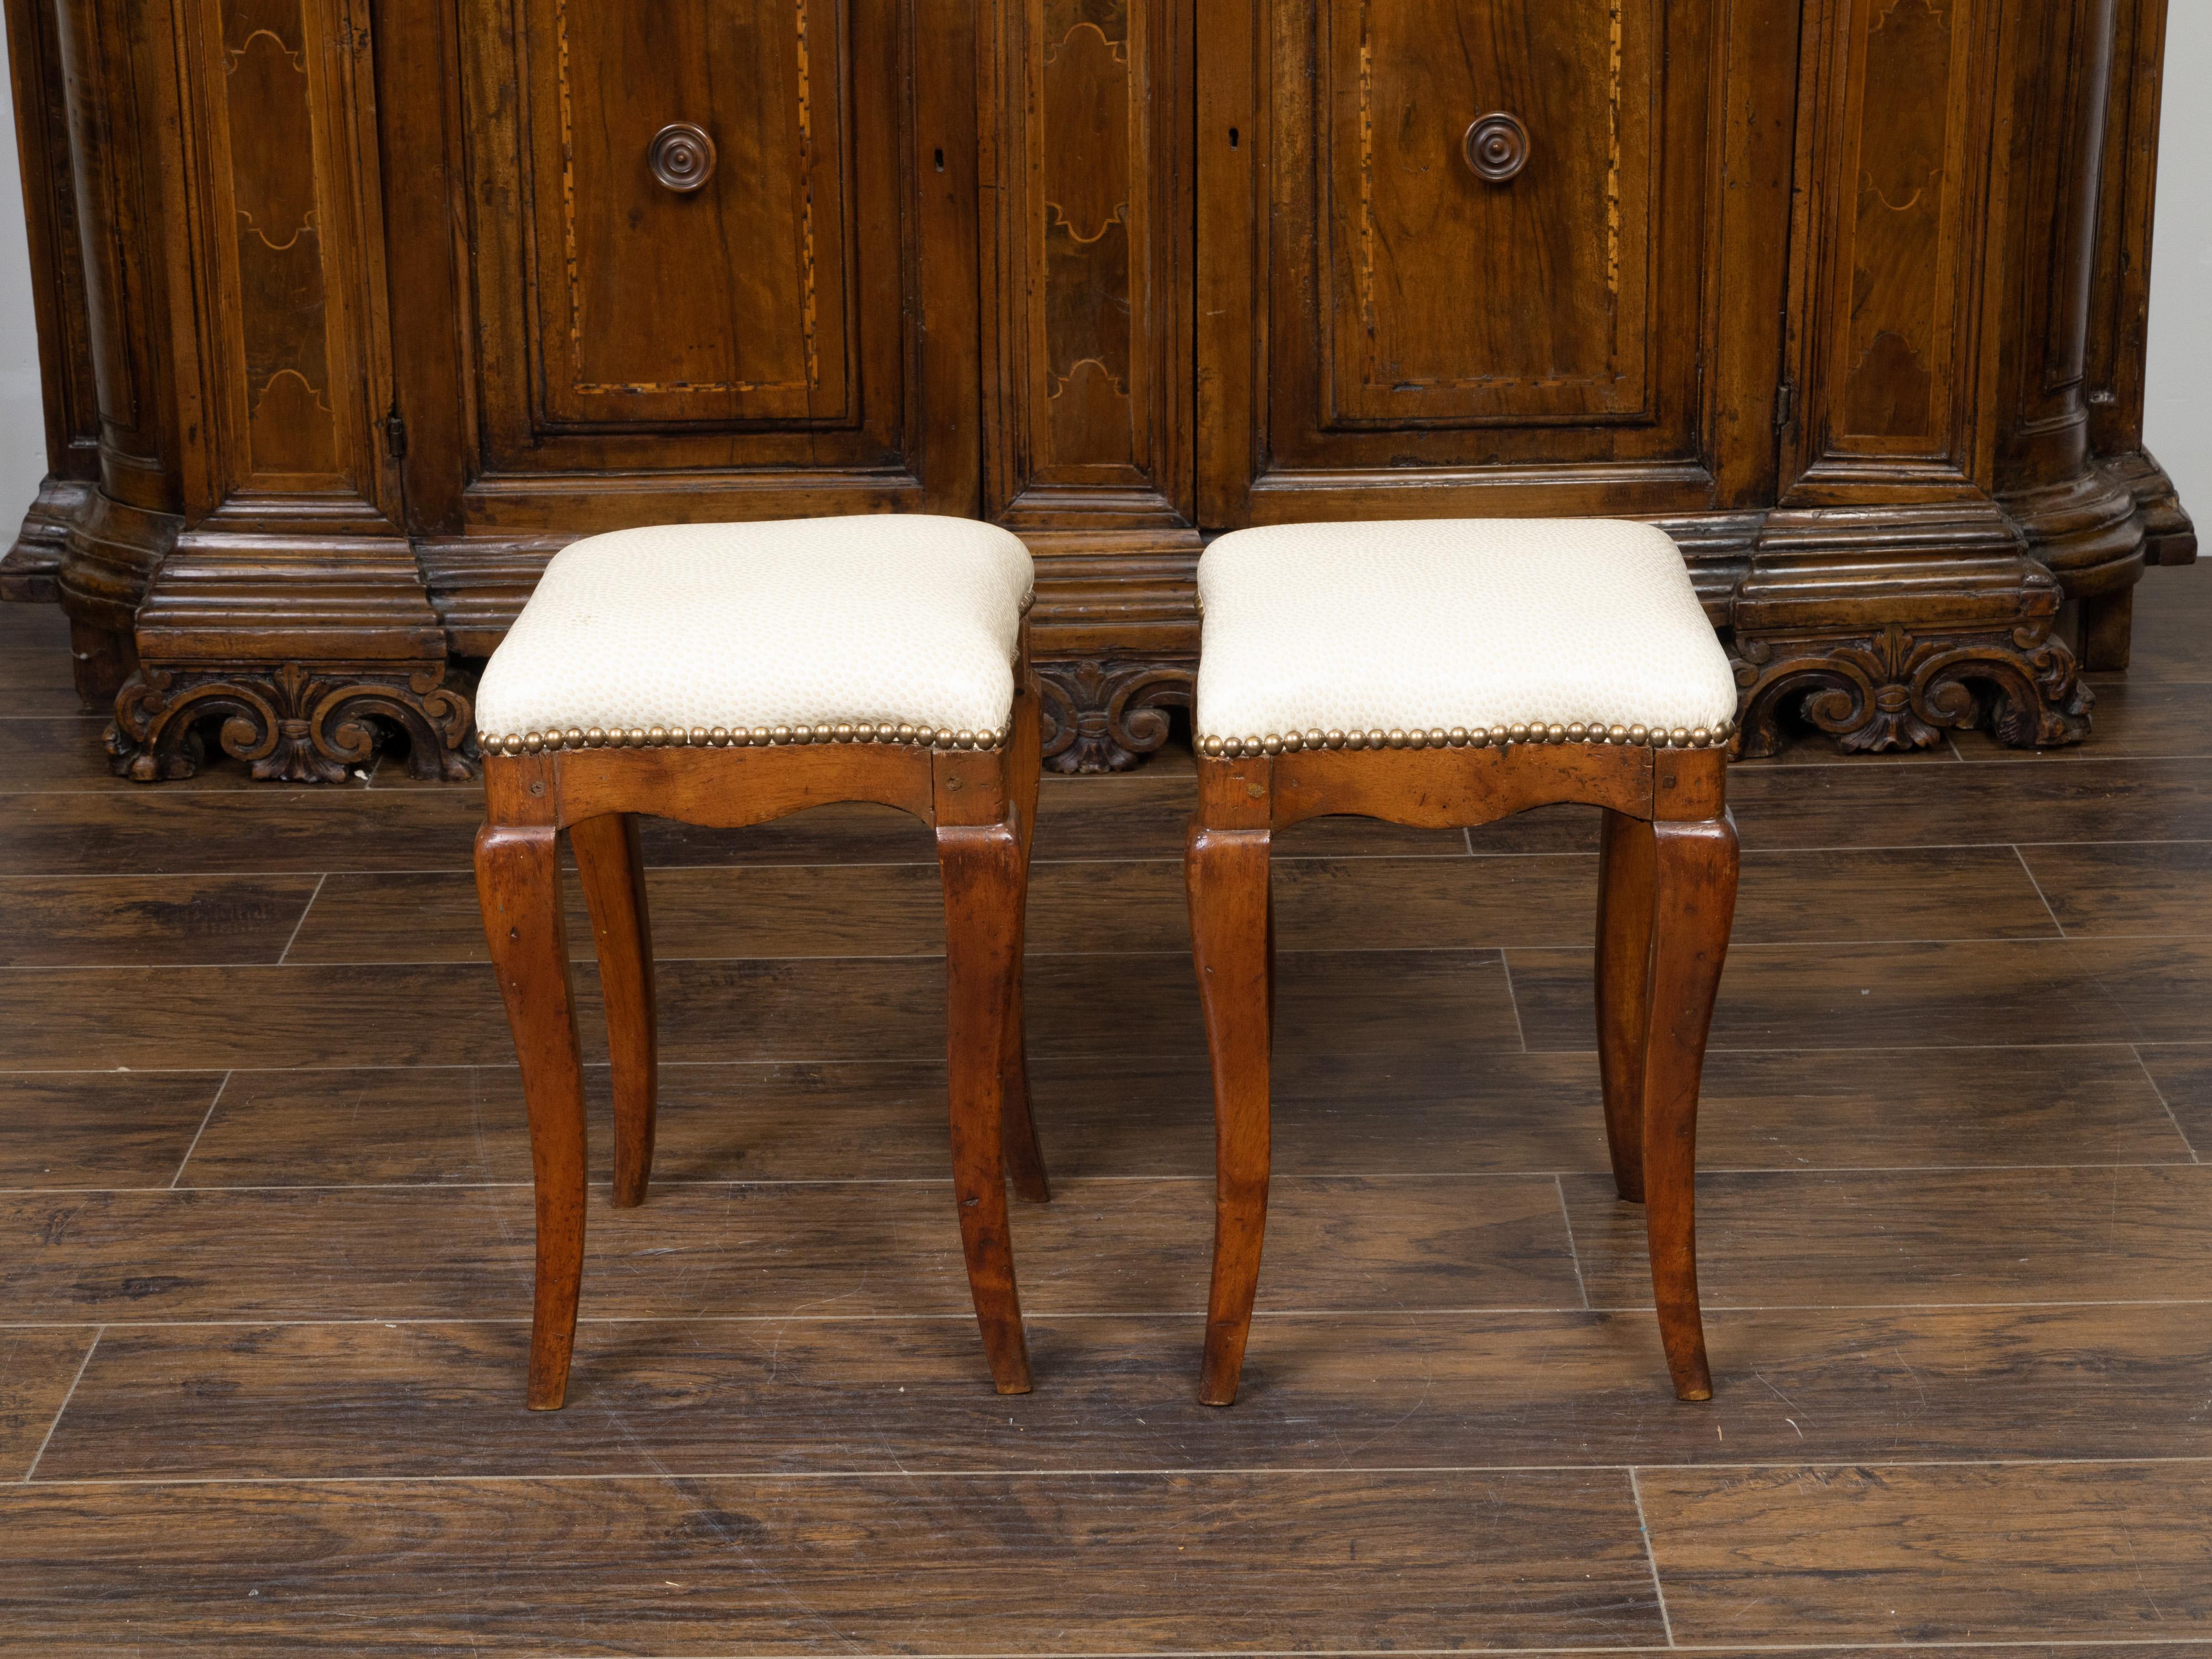 A pair of Italian walnut stools from the 19th century, with cabriole legs and new upholstery. Created in Italy during the 19th century, each of this pair of walnut stools features a square top newly reupholstered with a textured neutral toned fabric